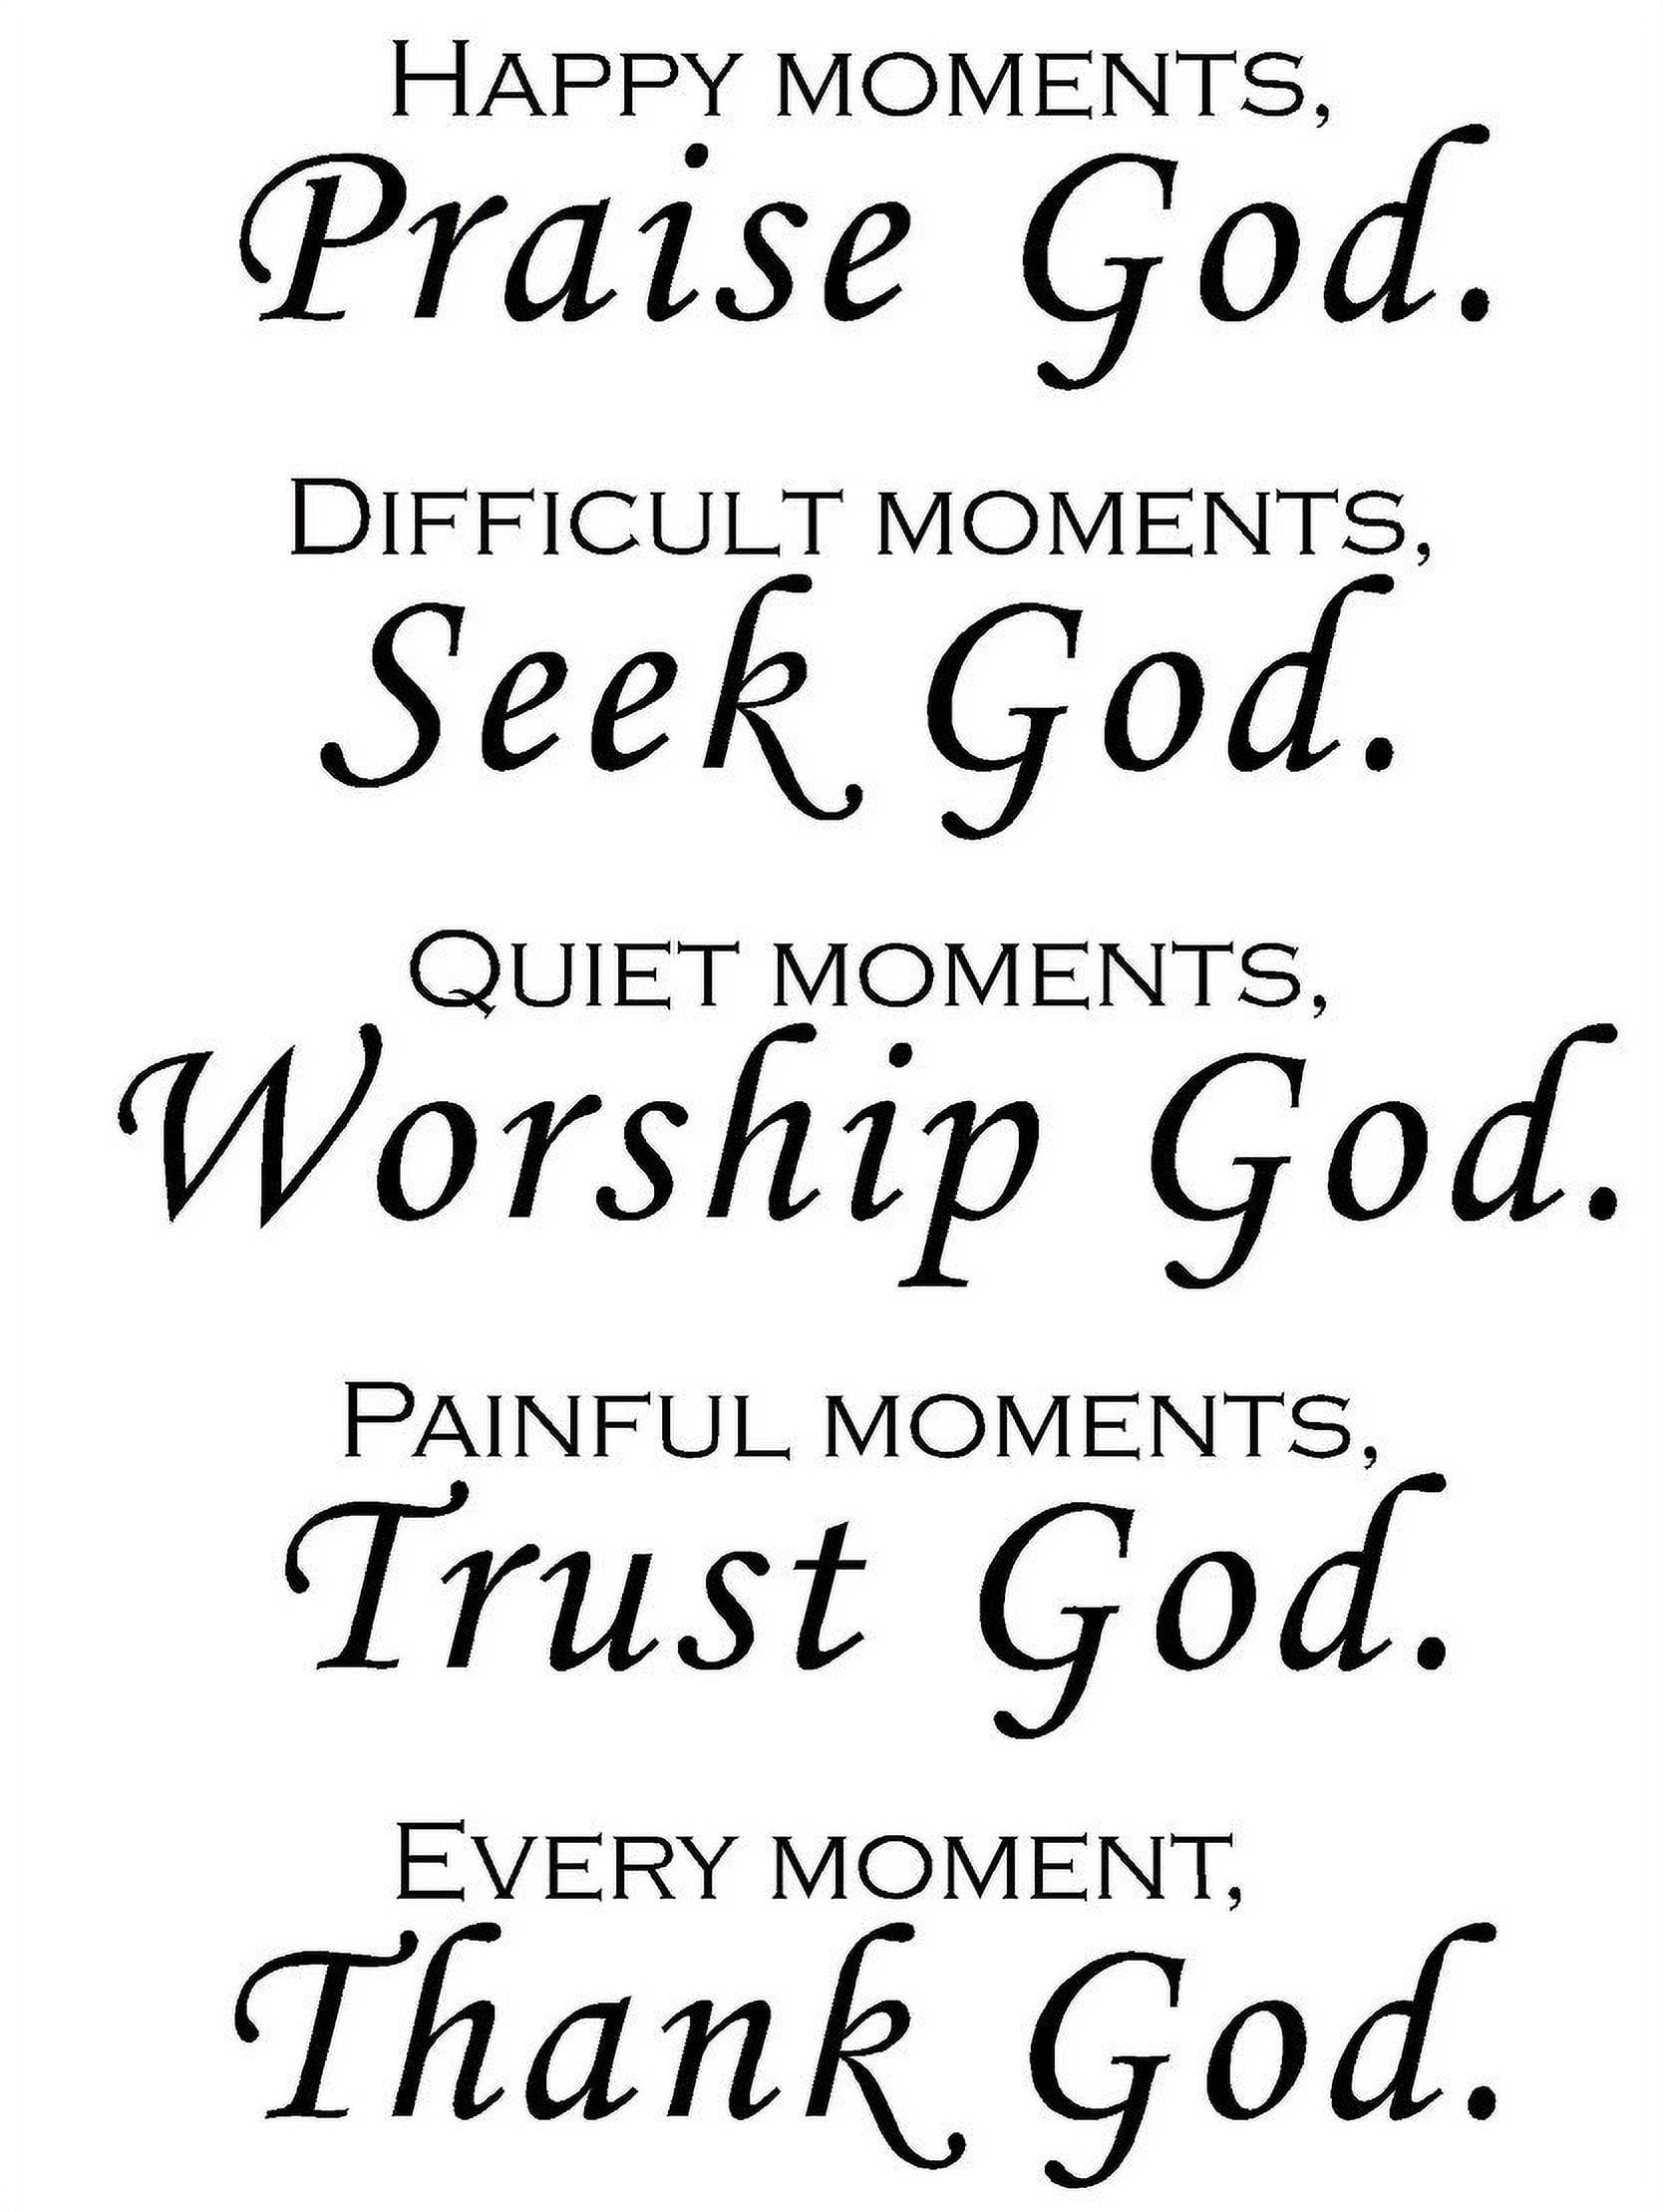 Happy Moments Wall Art Sayings Sticker Decor Decal Prayer Church Decorative  Removable Waterproof Quote Letters Wall Sticker Decals TV Background Paper